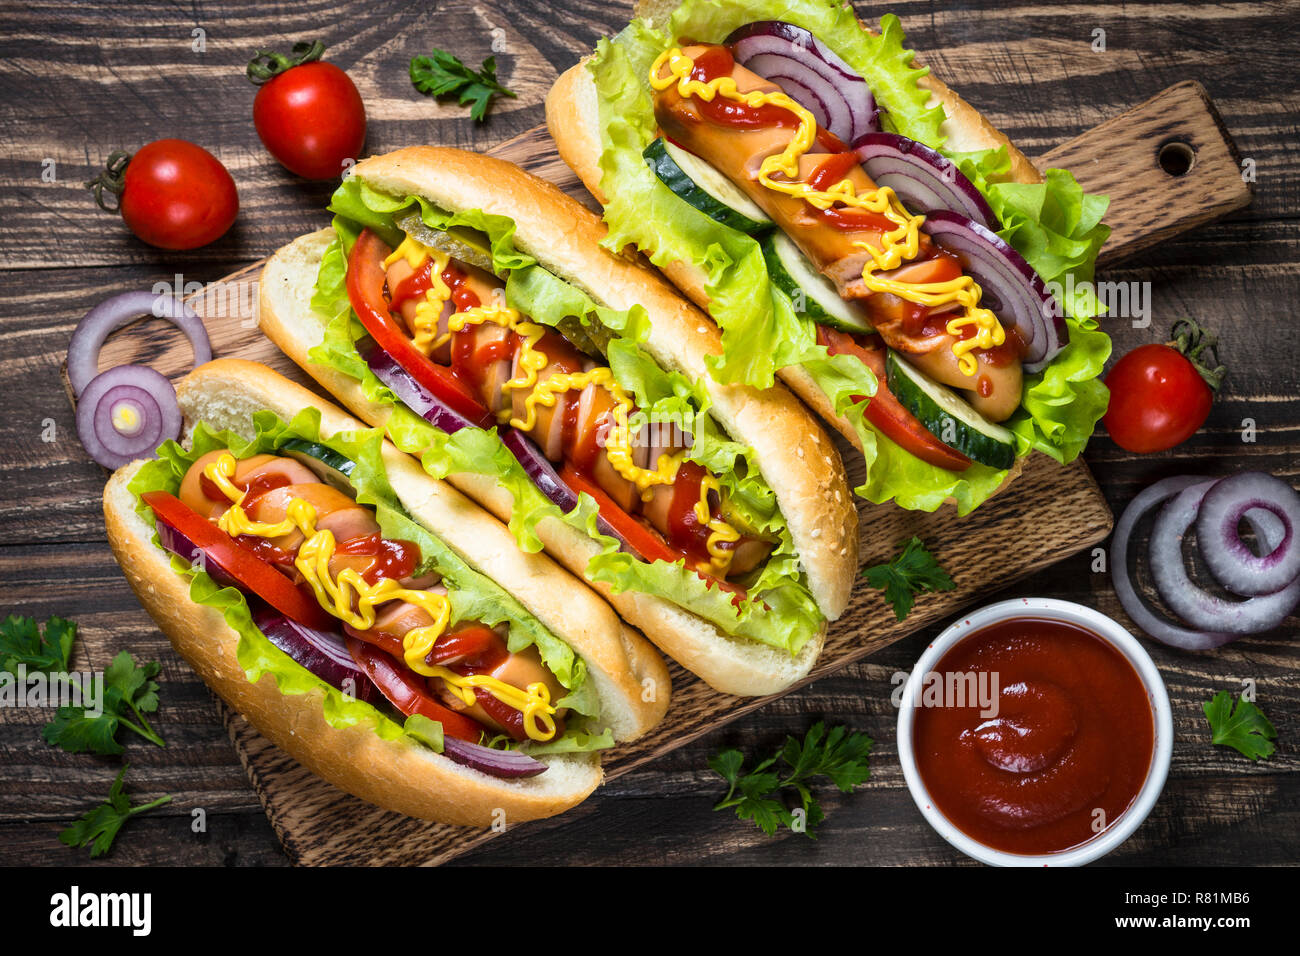 Hot dog with fresh vegetables on wooden table. Stock Photo